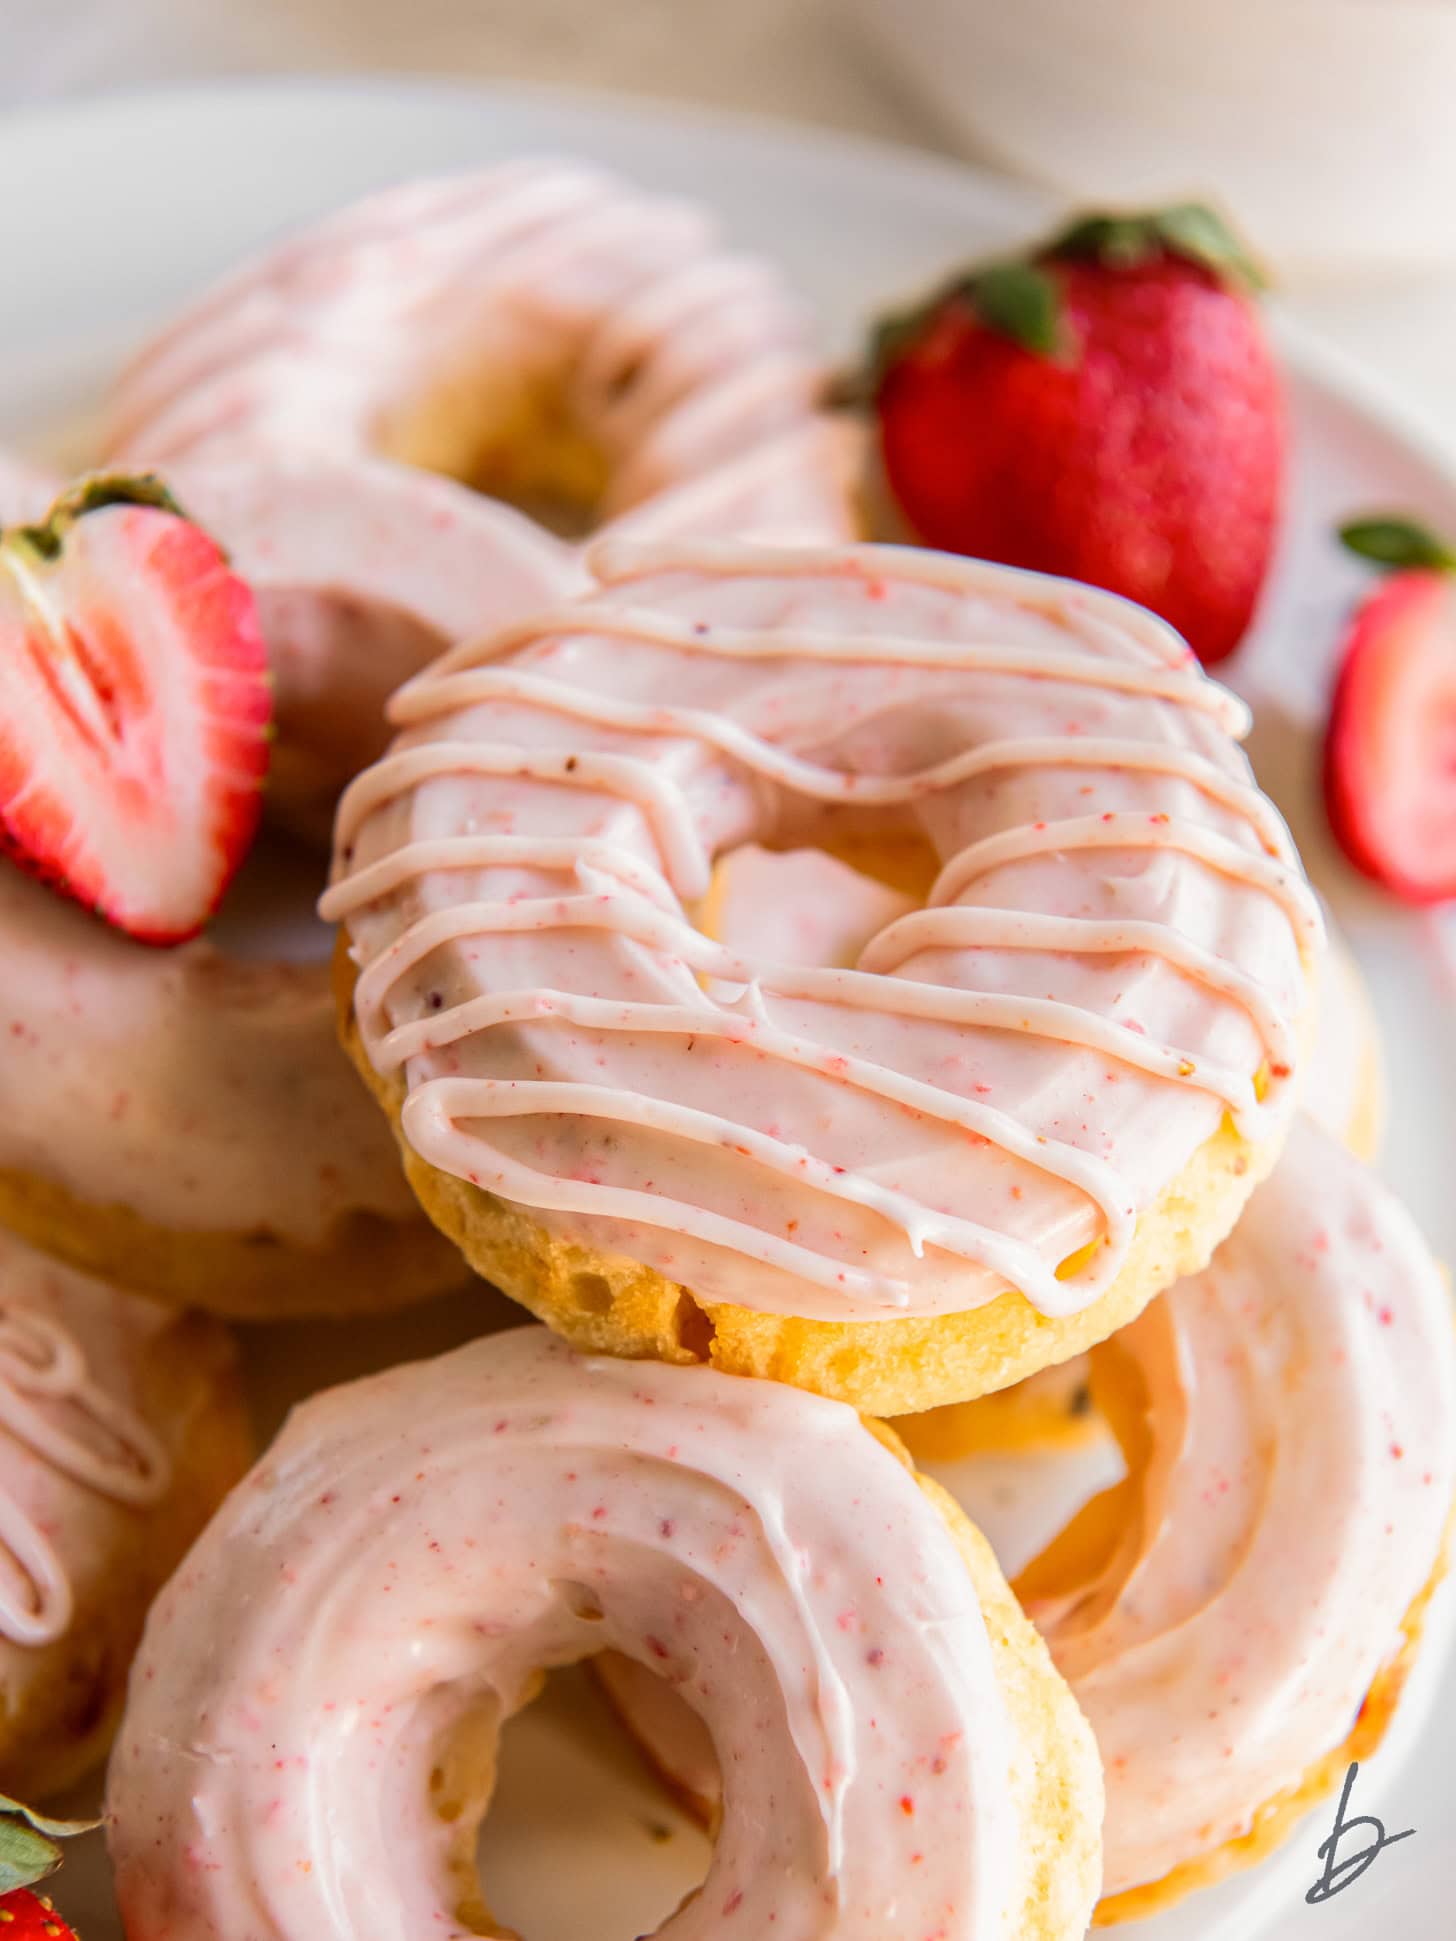 pink glazed strawberry donut on top of more donuts on a plate.